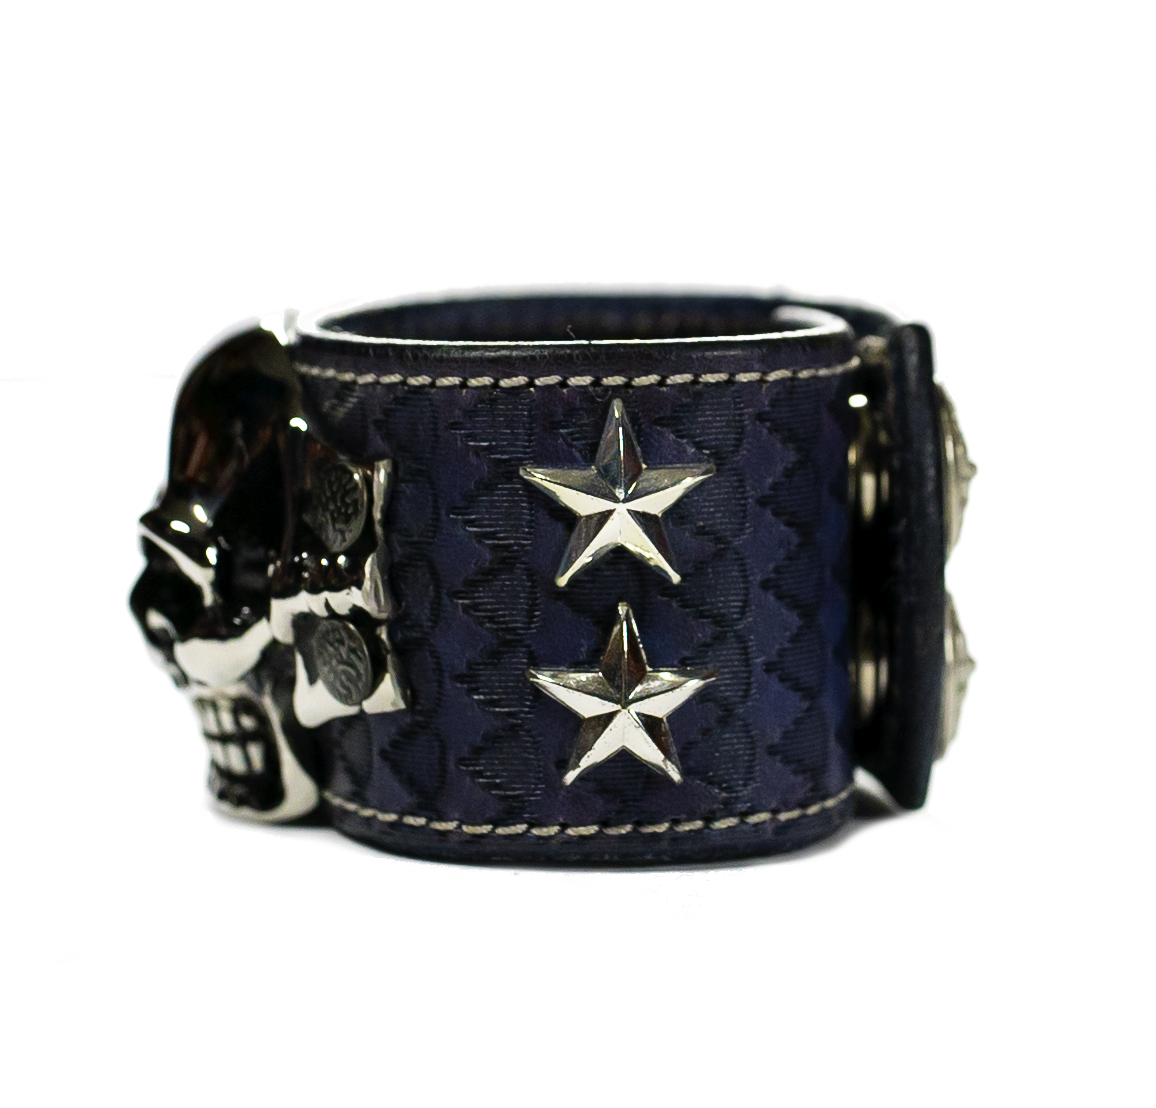 The Big Skull Navy Leather Cuff left side